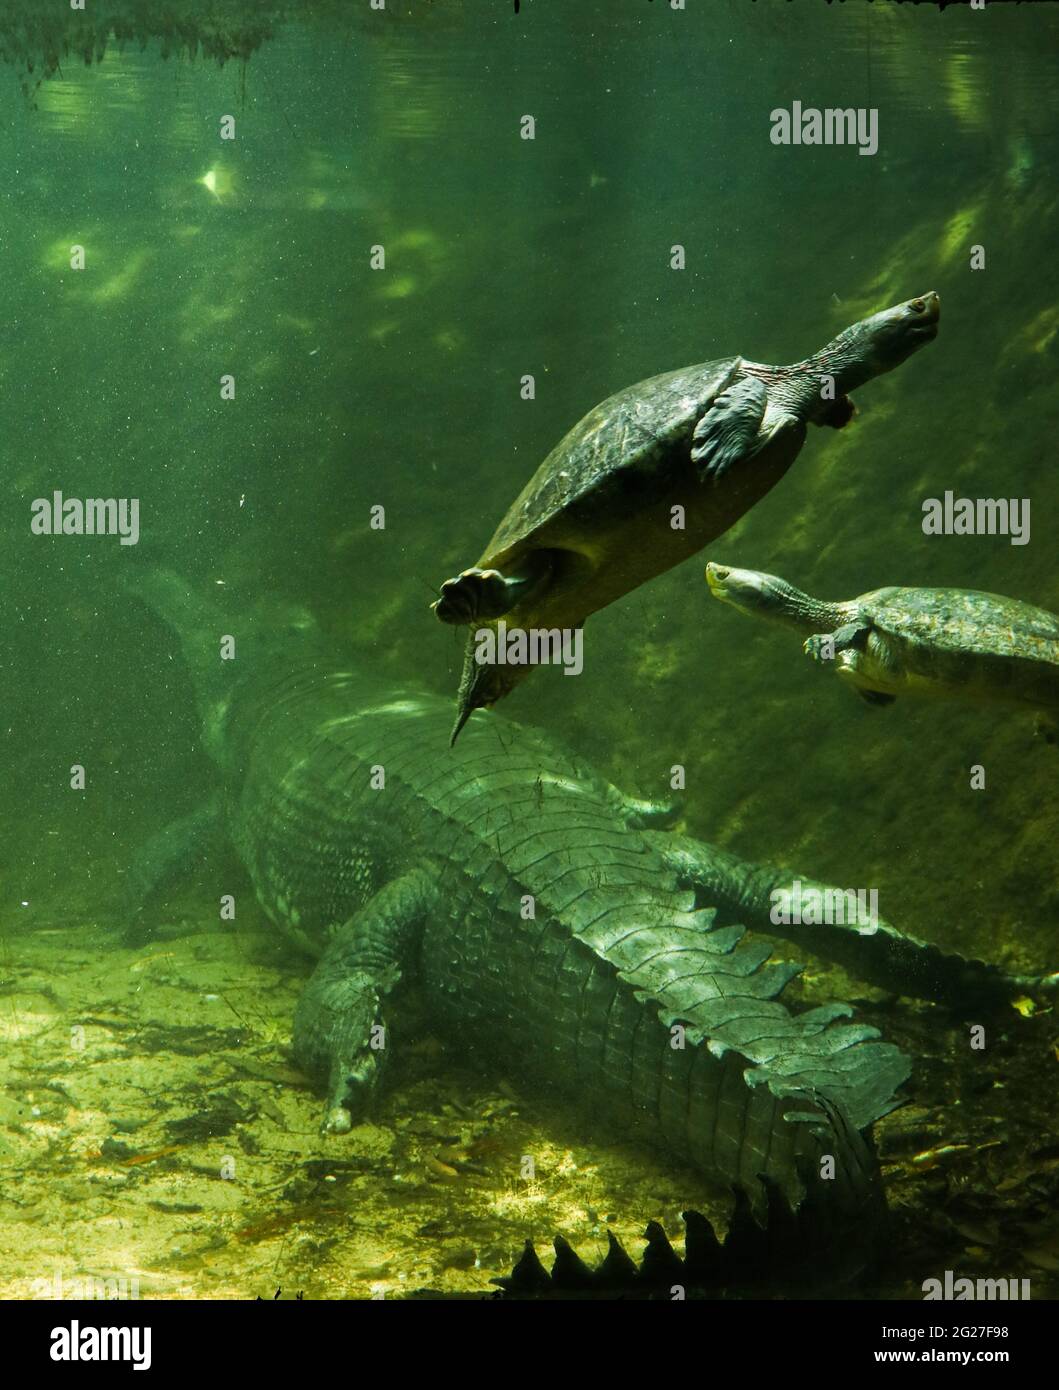 photo taken from a reptile zoo of a crocodile and turtles in a  green aquarium coexisting with each other Stock Photo